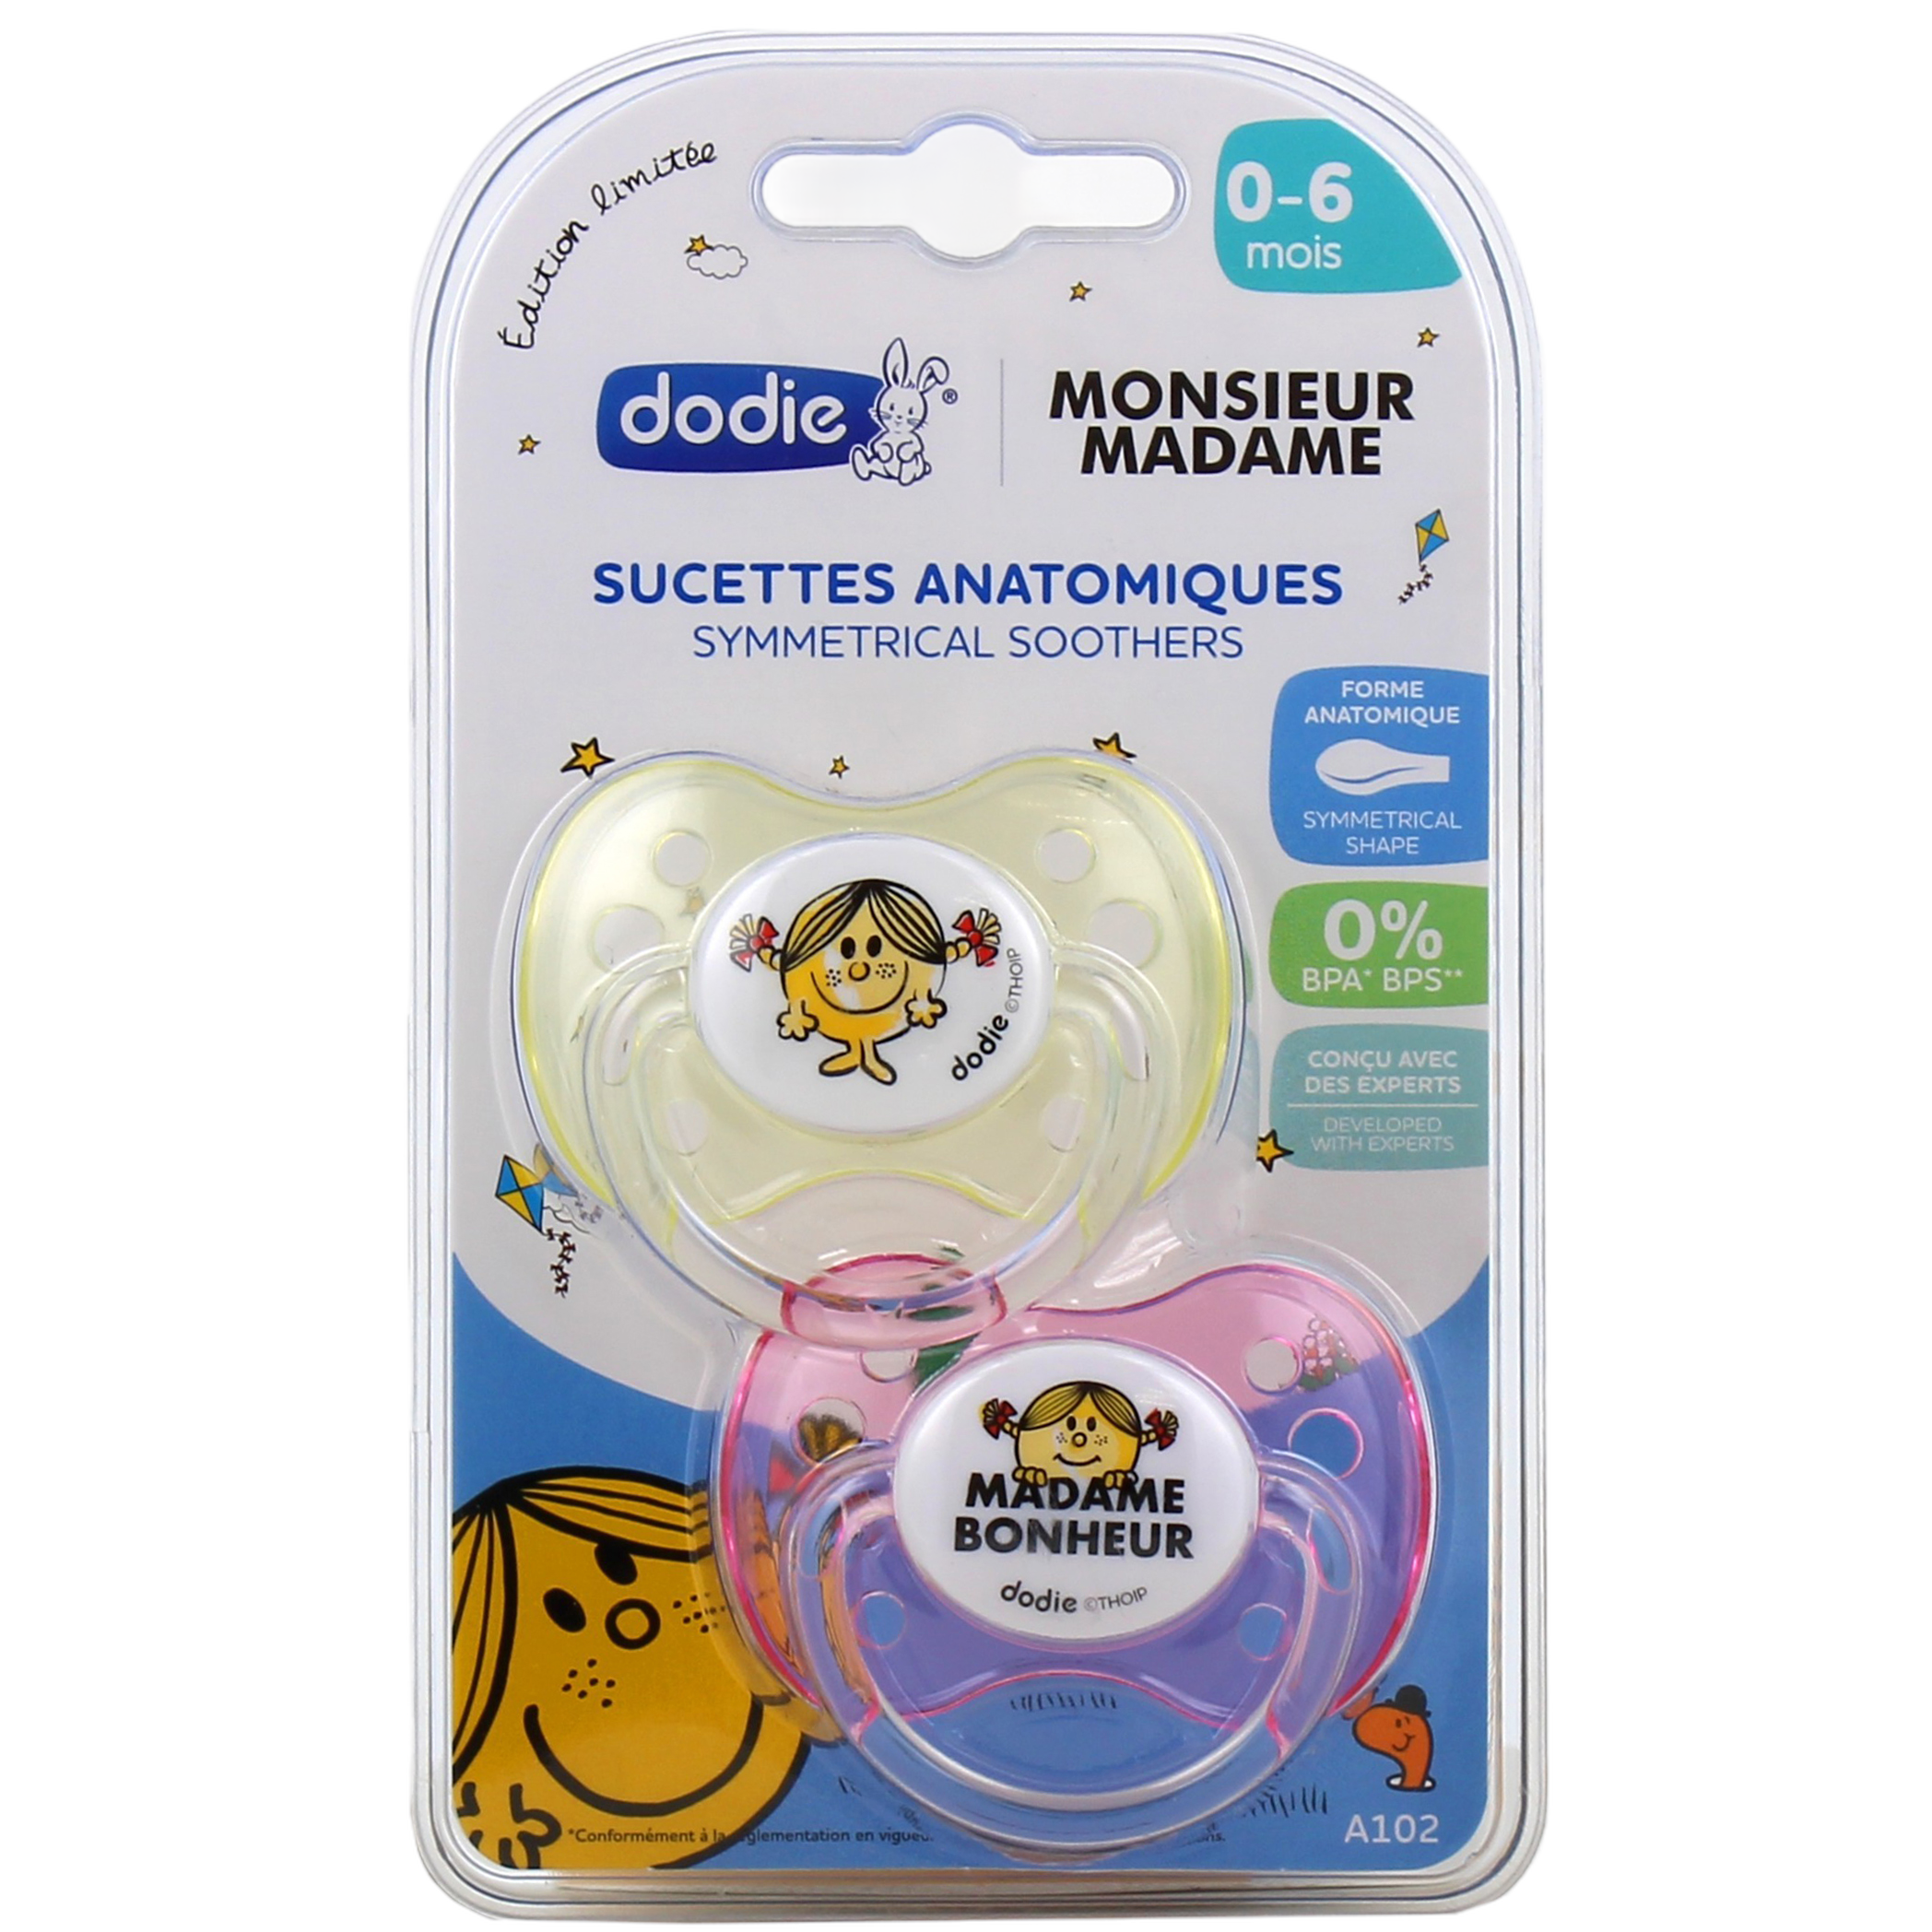 Dodie Sucette Anatomique Silicone 0-6 mois (Soleil) n°A94 - Paraphamadirect